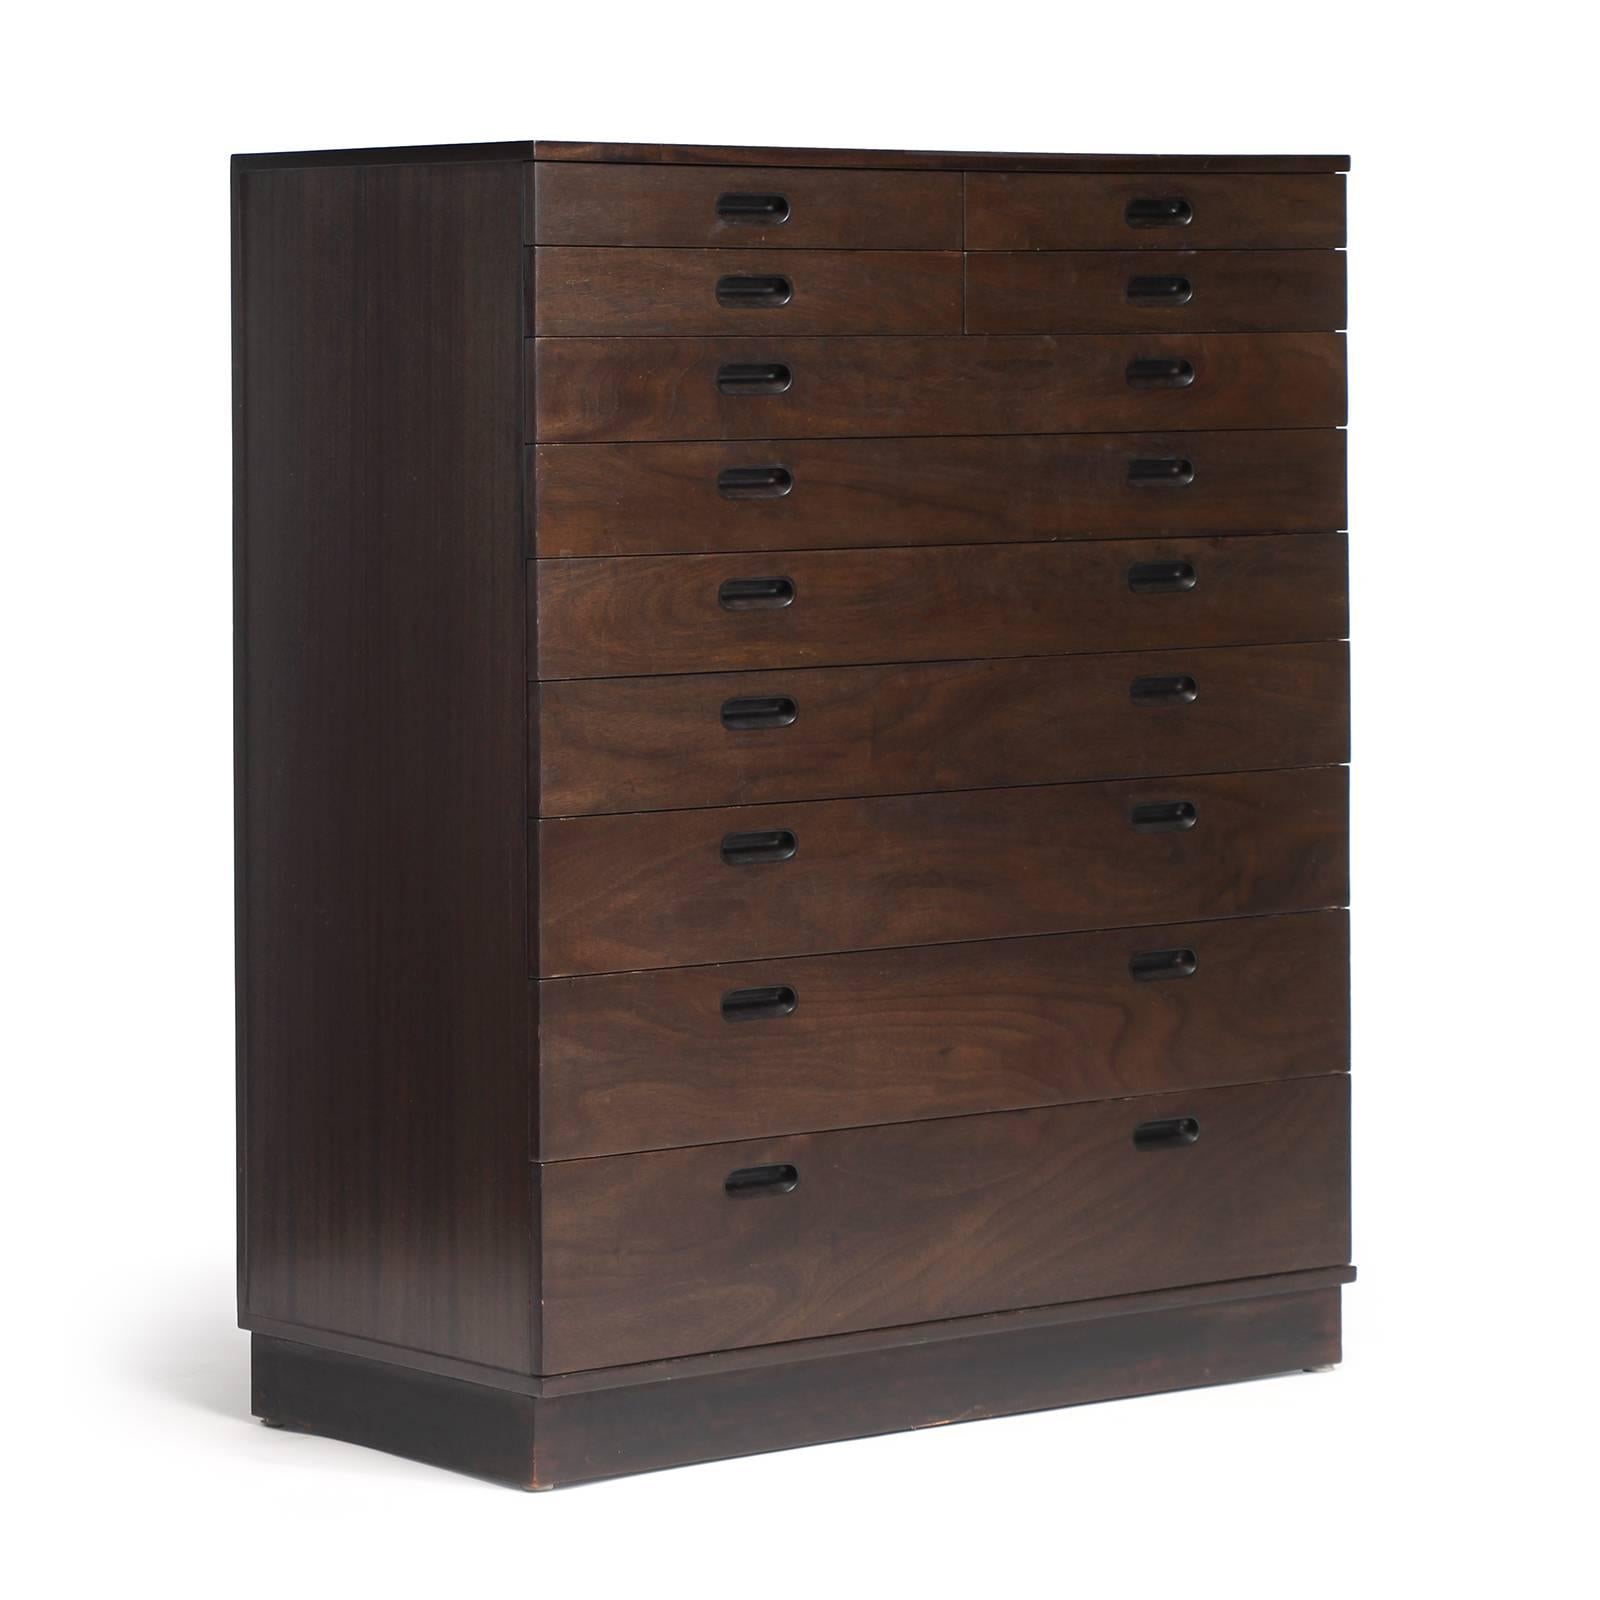 A tall rectilinear chest of eleven drawers in richly figured walnut having a four-over-seven-drawer configuration, a leather-wrapped plinth base and distinctive recessed pulls.